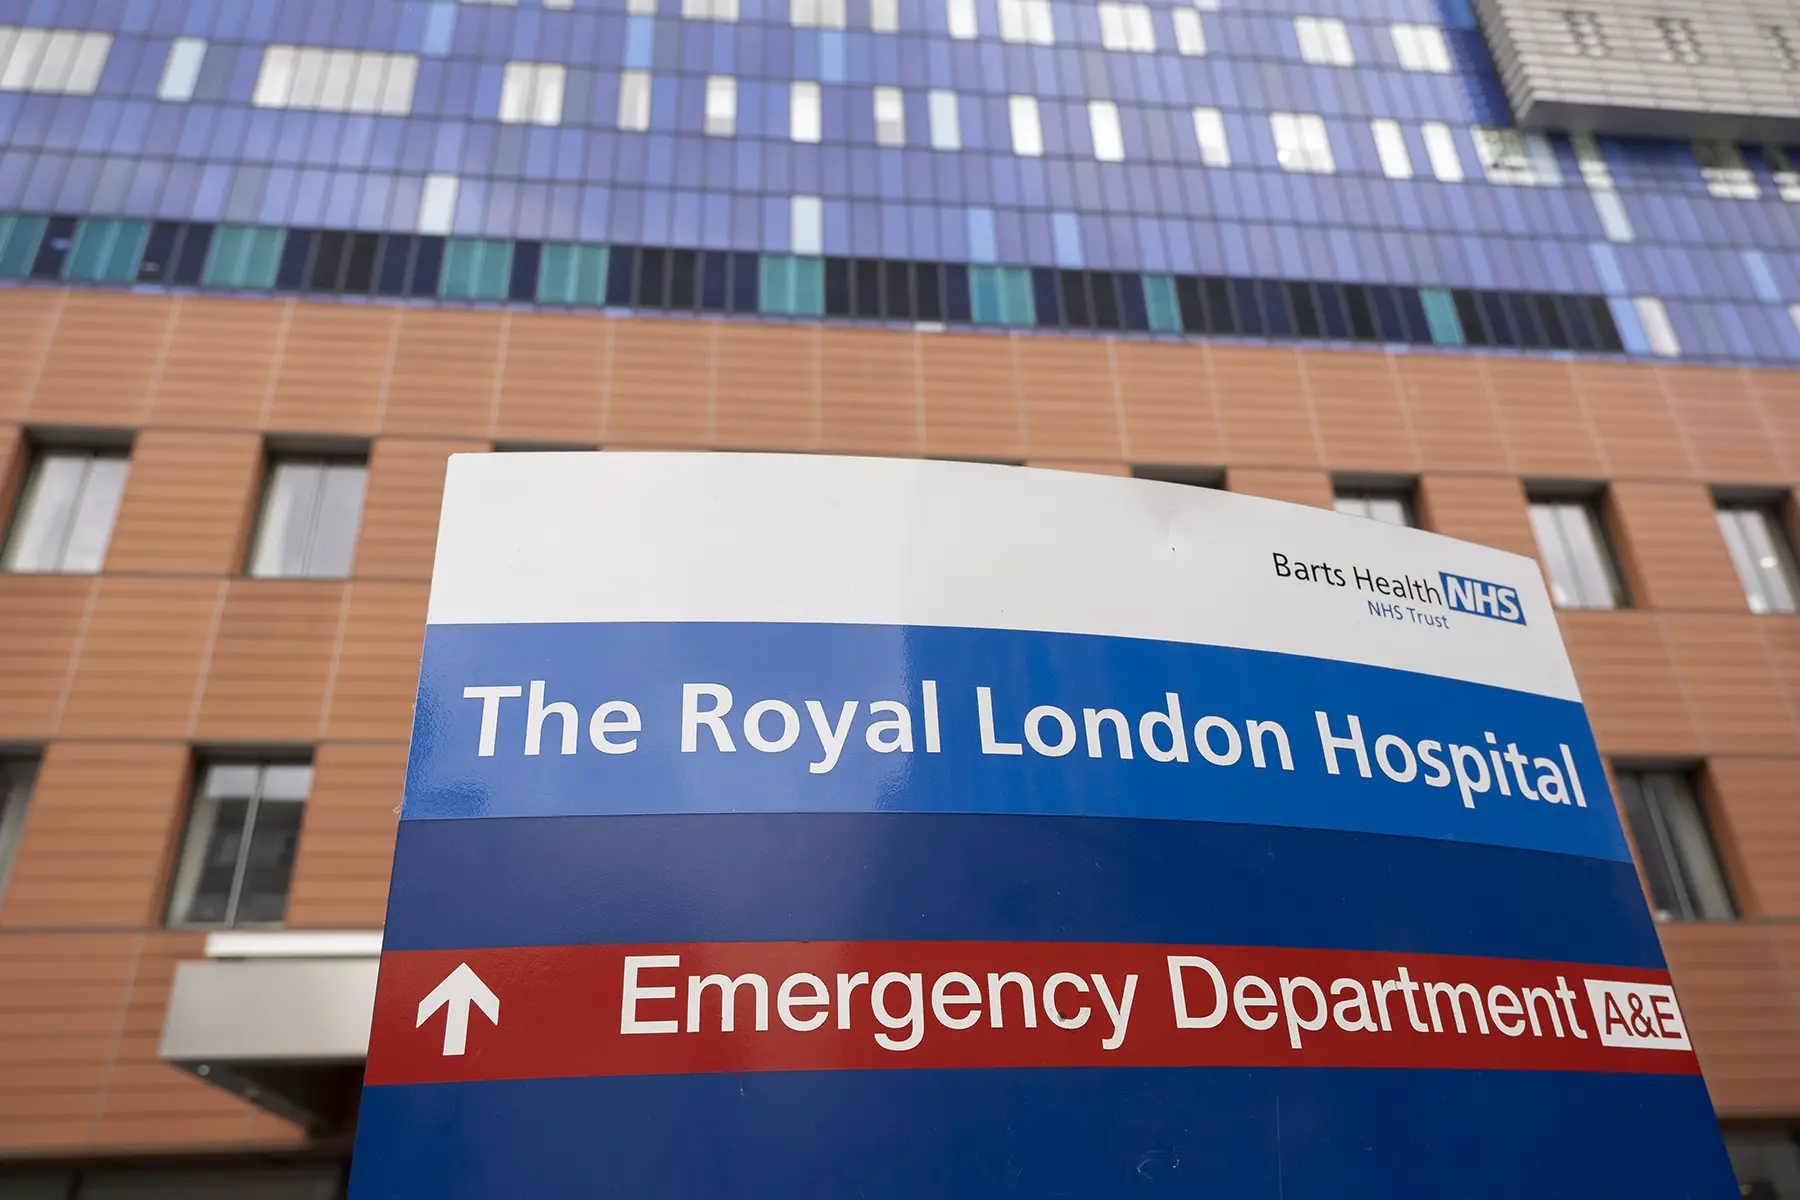 The NHS logo on a sign in front of the Royal London Hospital